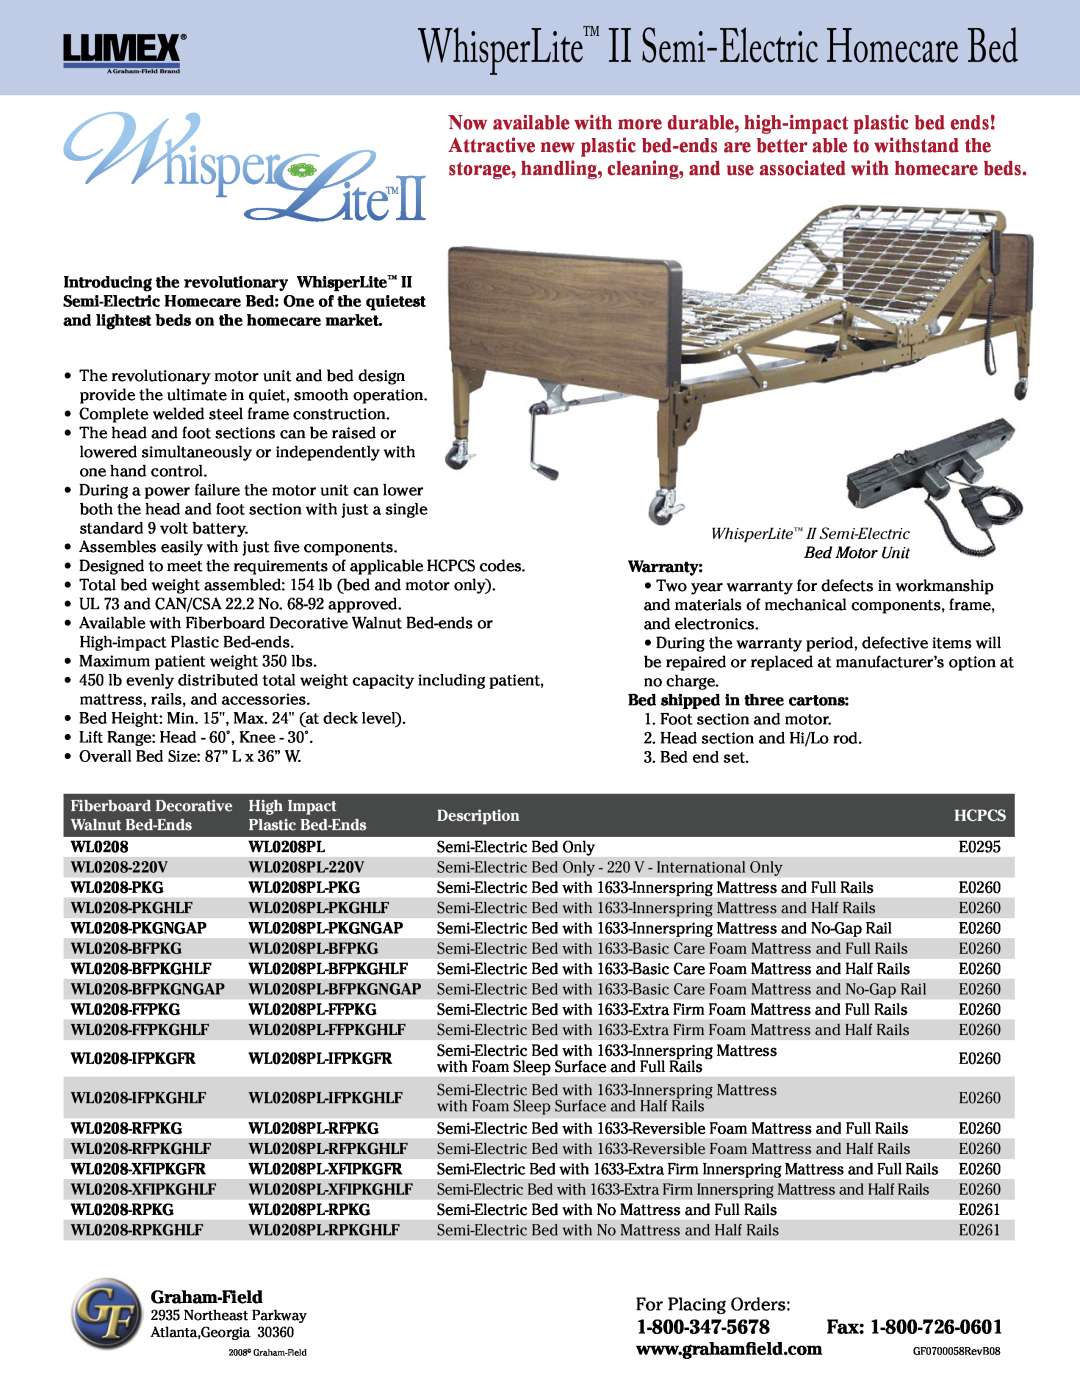 Graham Field WL0208 warranty WhisperLite II Semi-Electric Homecare Bed, Graham-Field, For Placing Orders, High Impact 